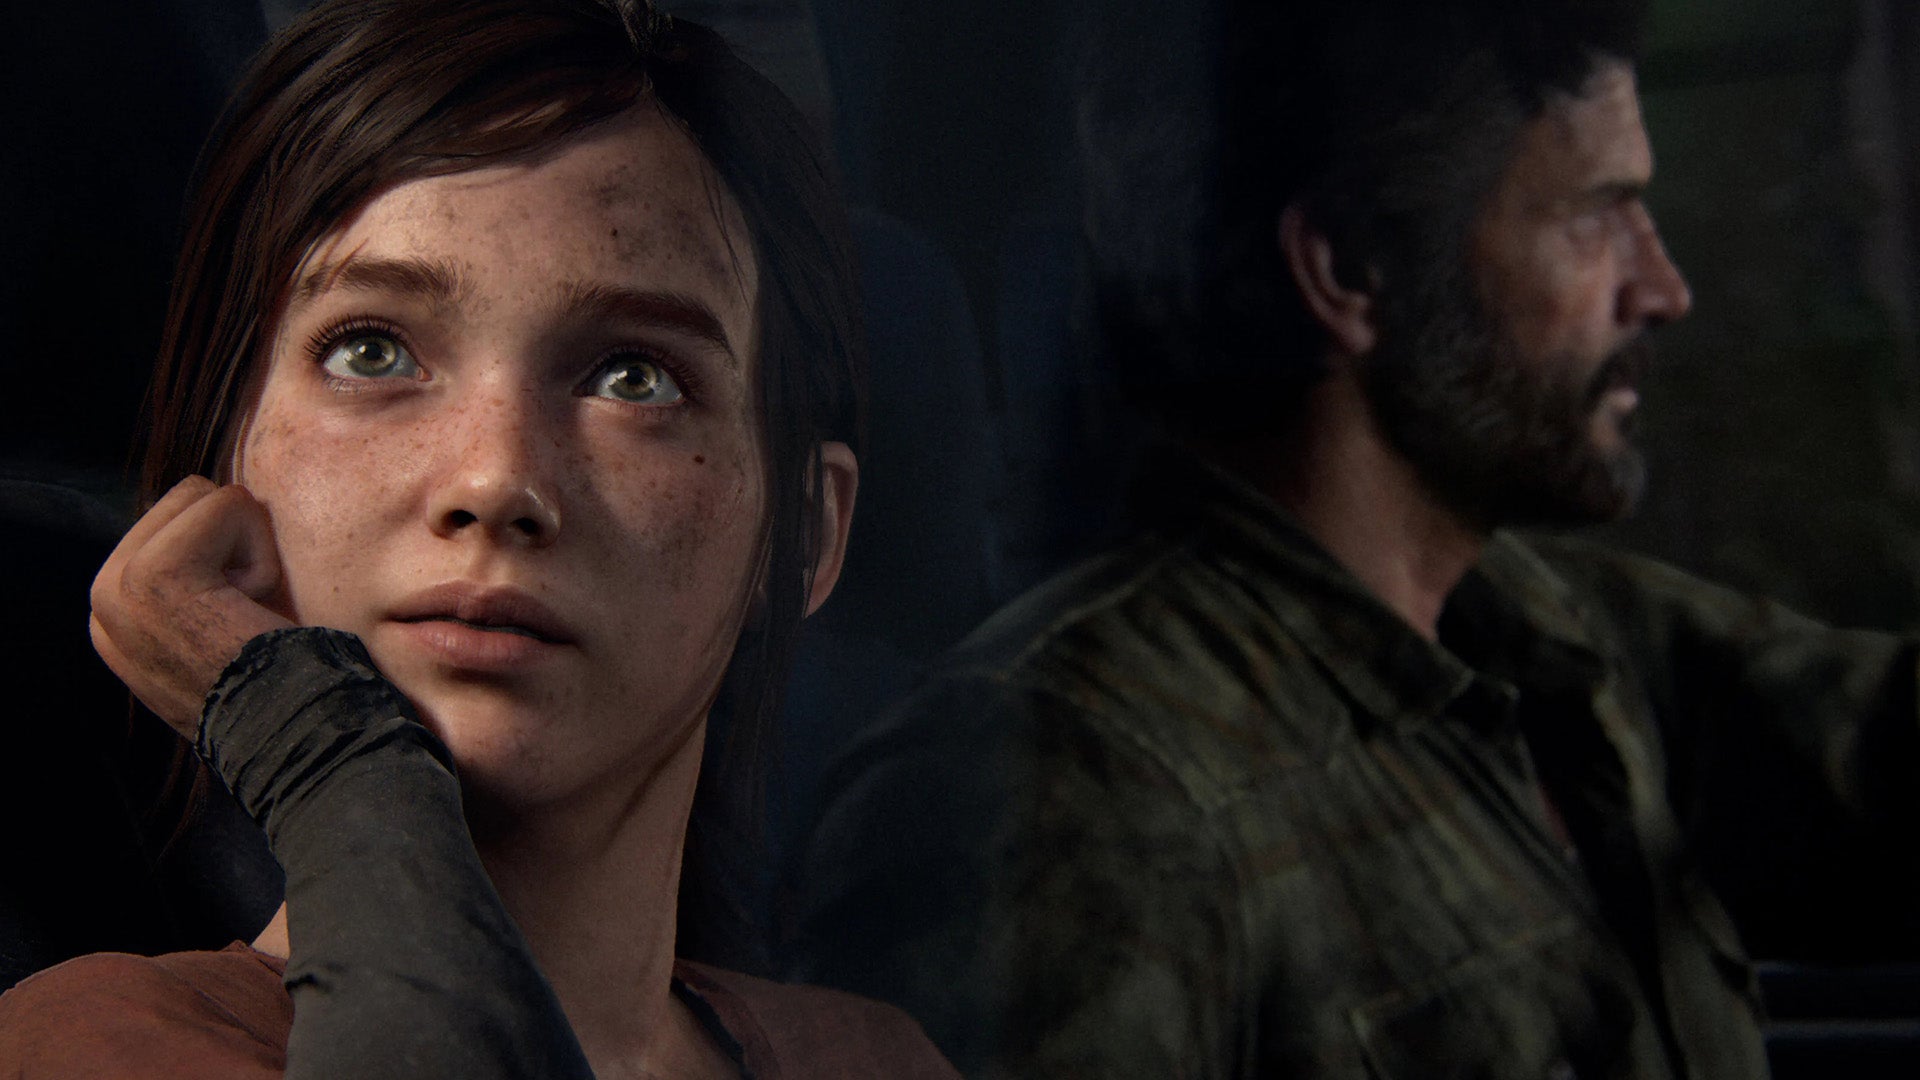 We haven’t seen The Last of US TV show yet, so here’s a story about a 2-hour The Last of Us Part 1 PS5 trial